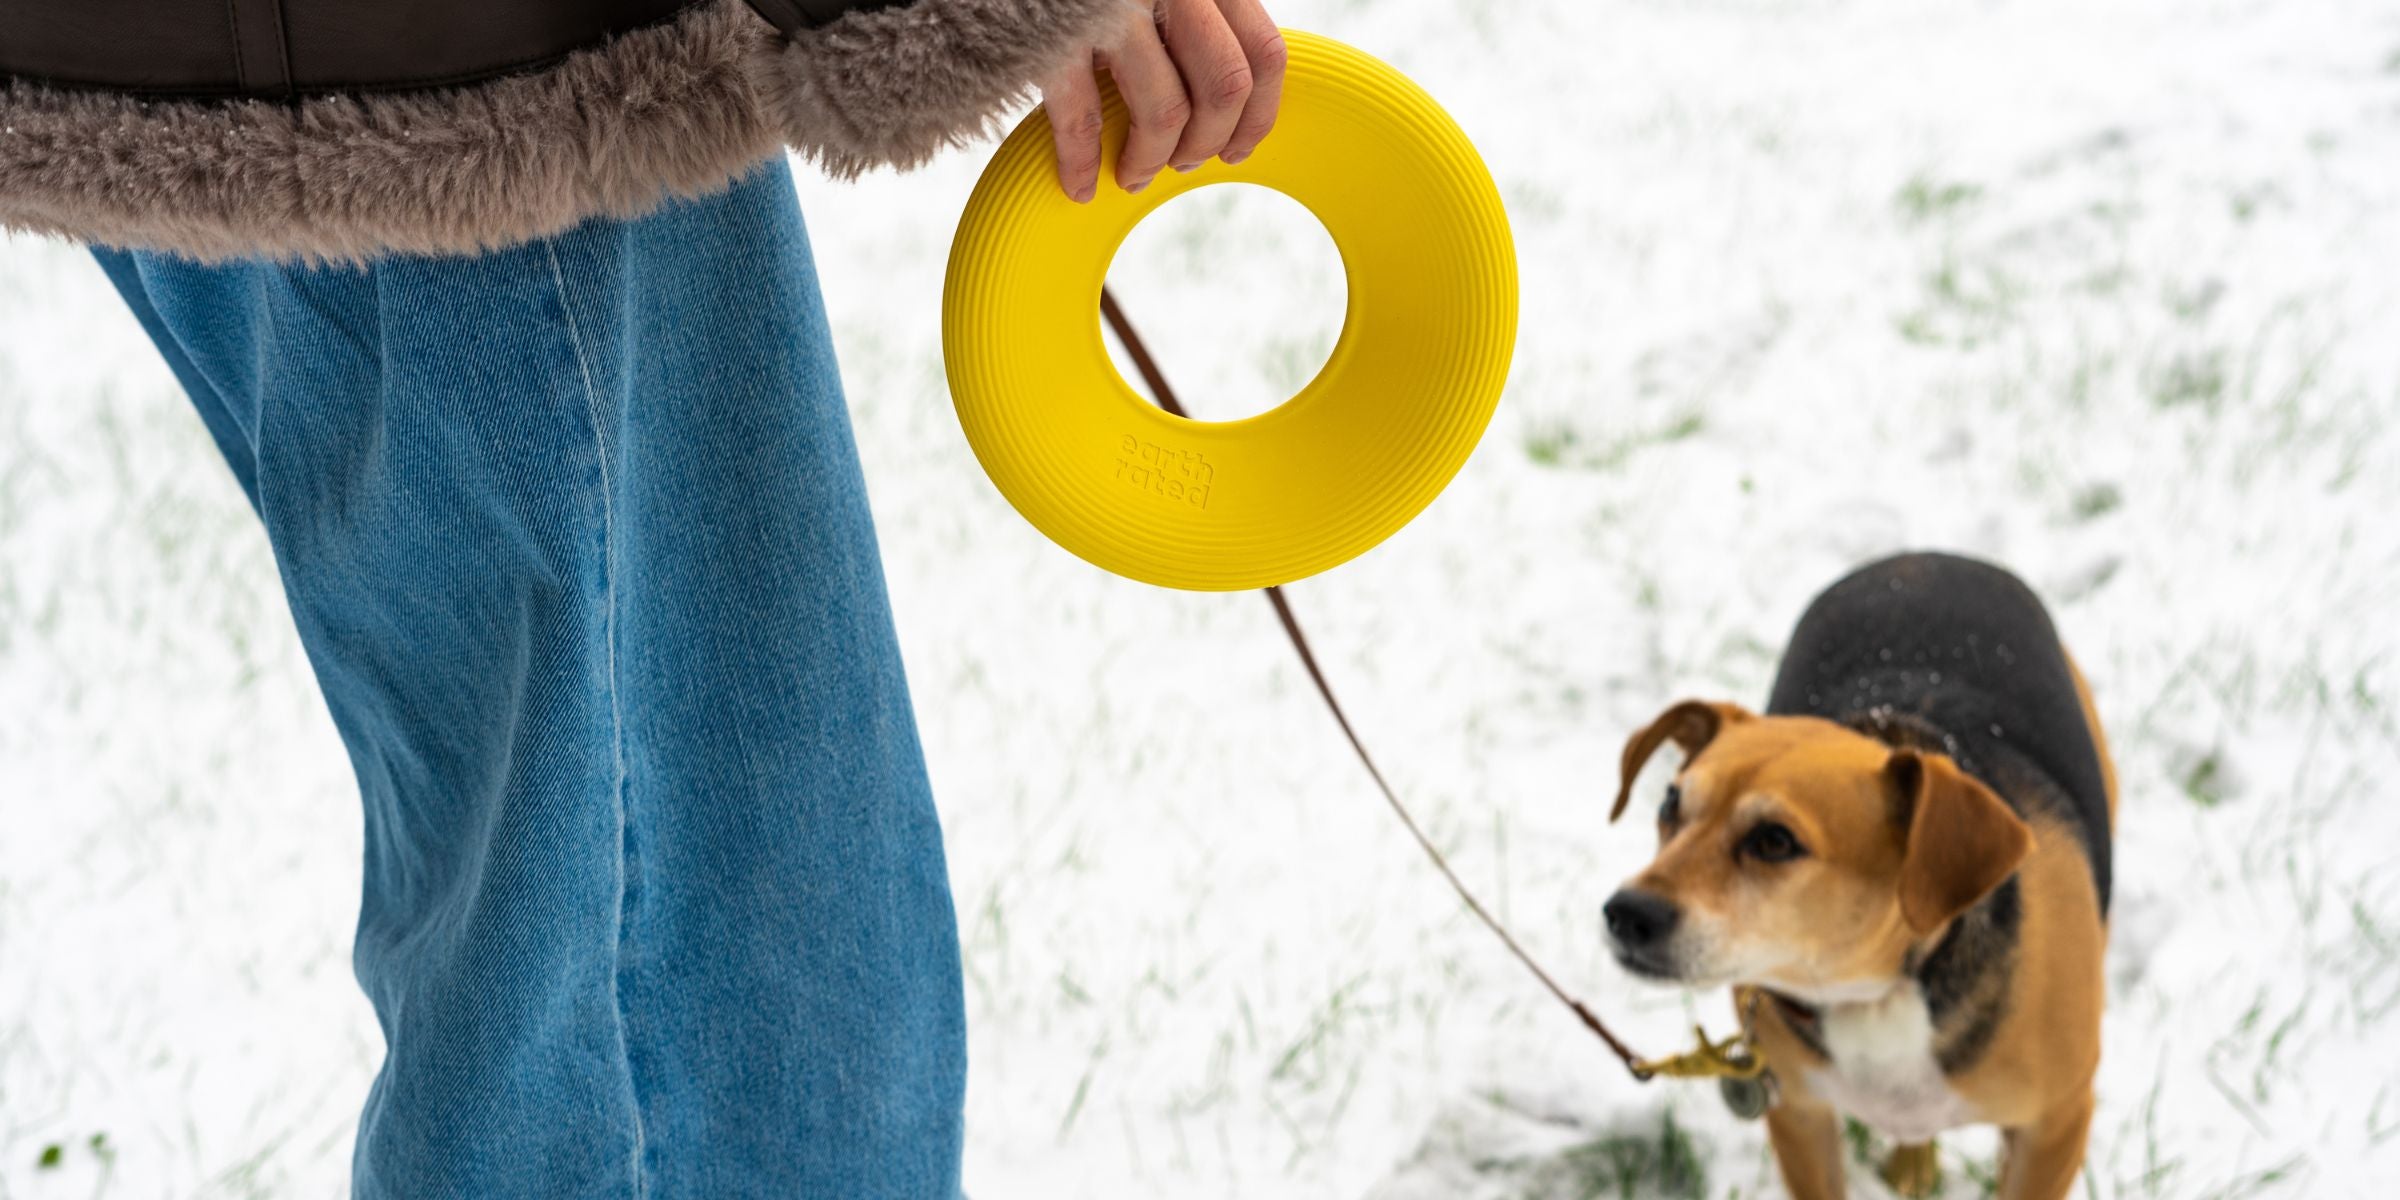 Dog Treat Toy: Everything's Better with Treats - Earth Rated